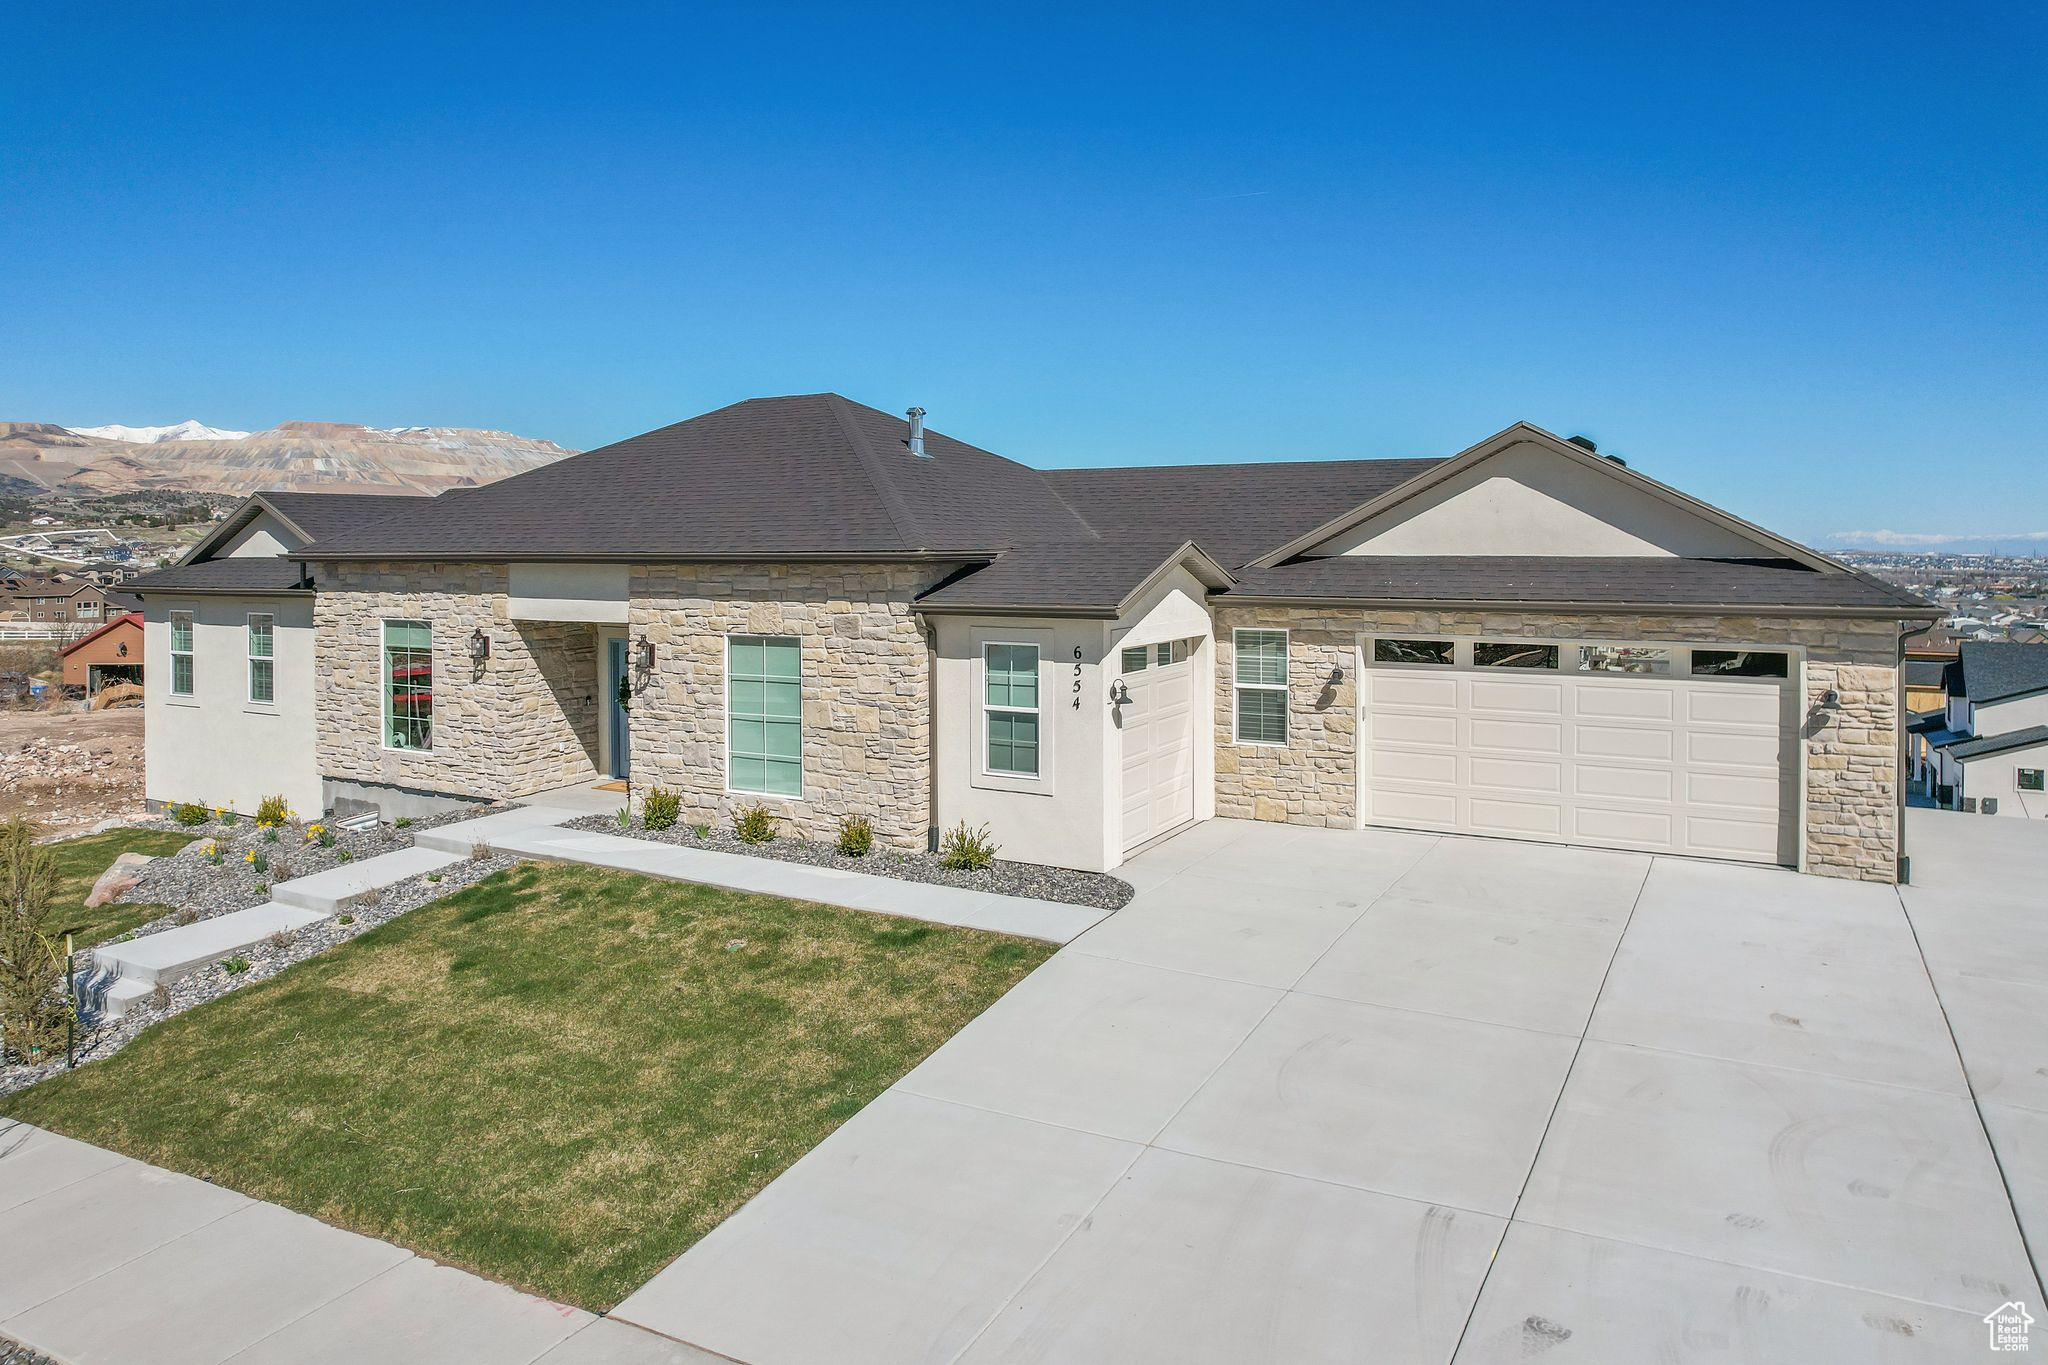 View of front of home featuring a beautifully landscaped lawn, 3 car garage, valley views, & walkout basement